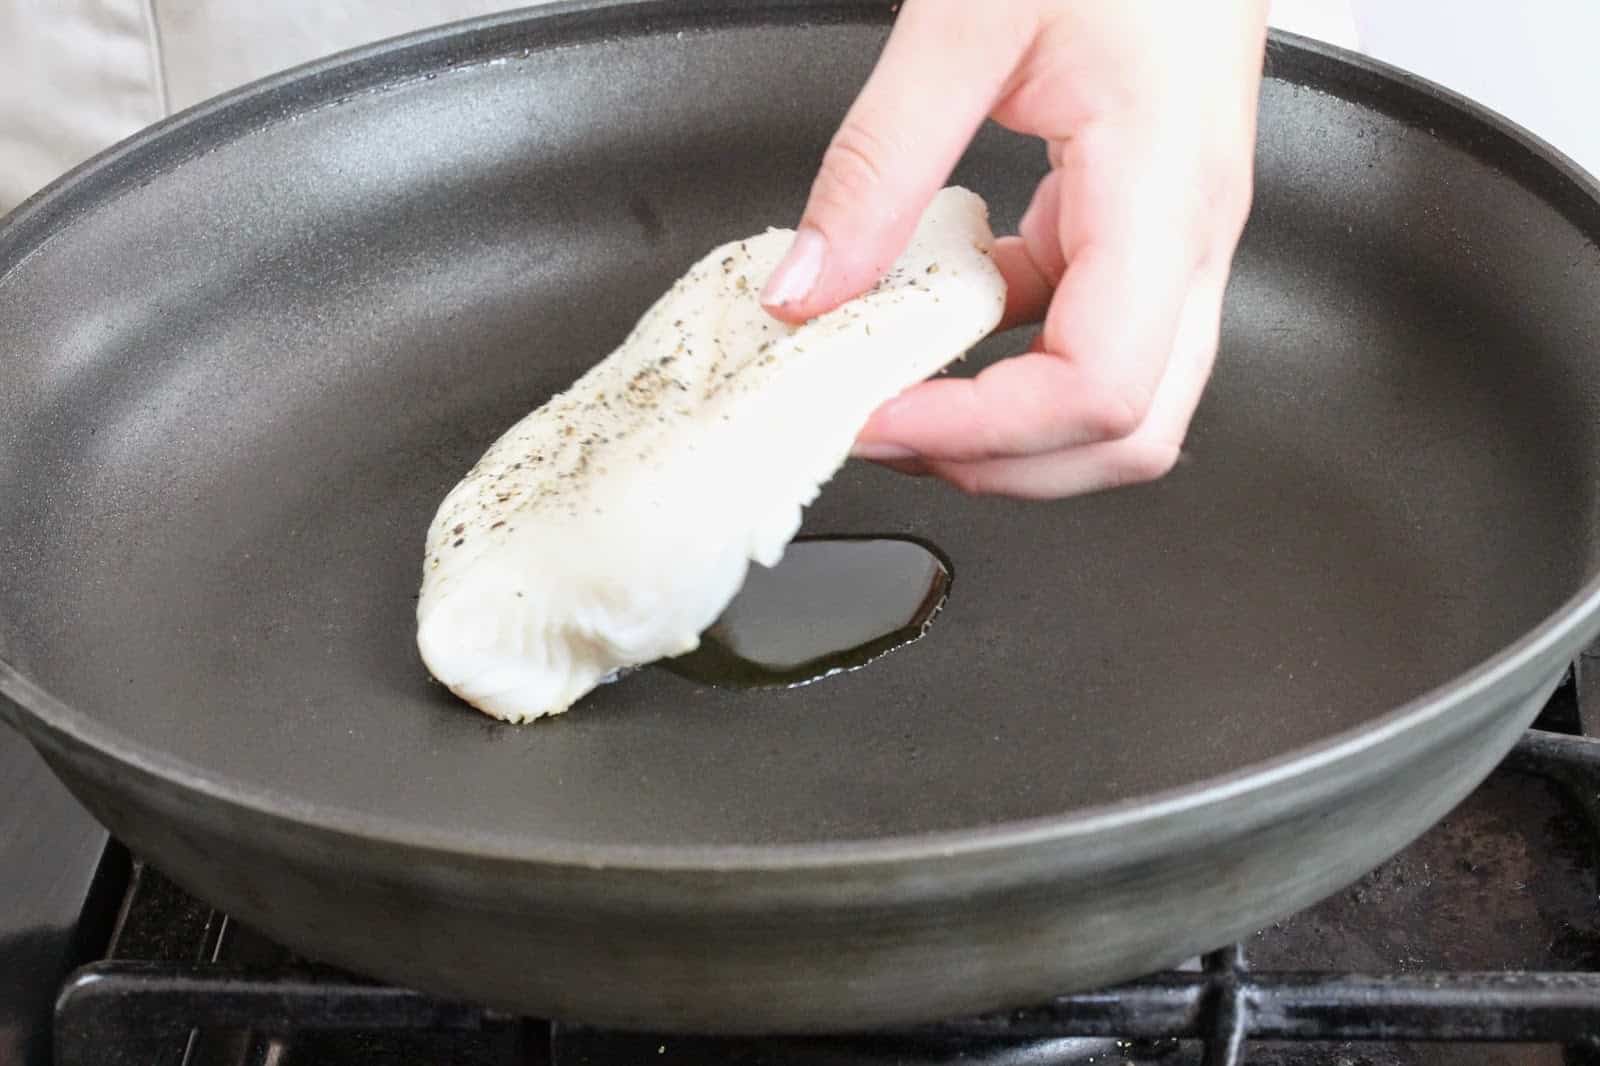 The filet is gently placed into the oil on the skillet